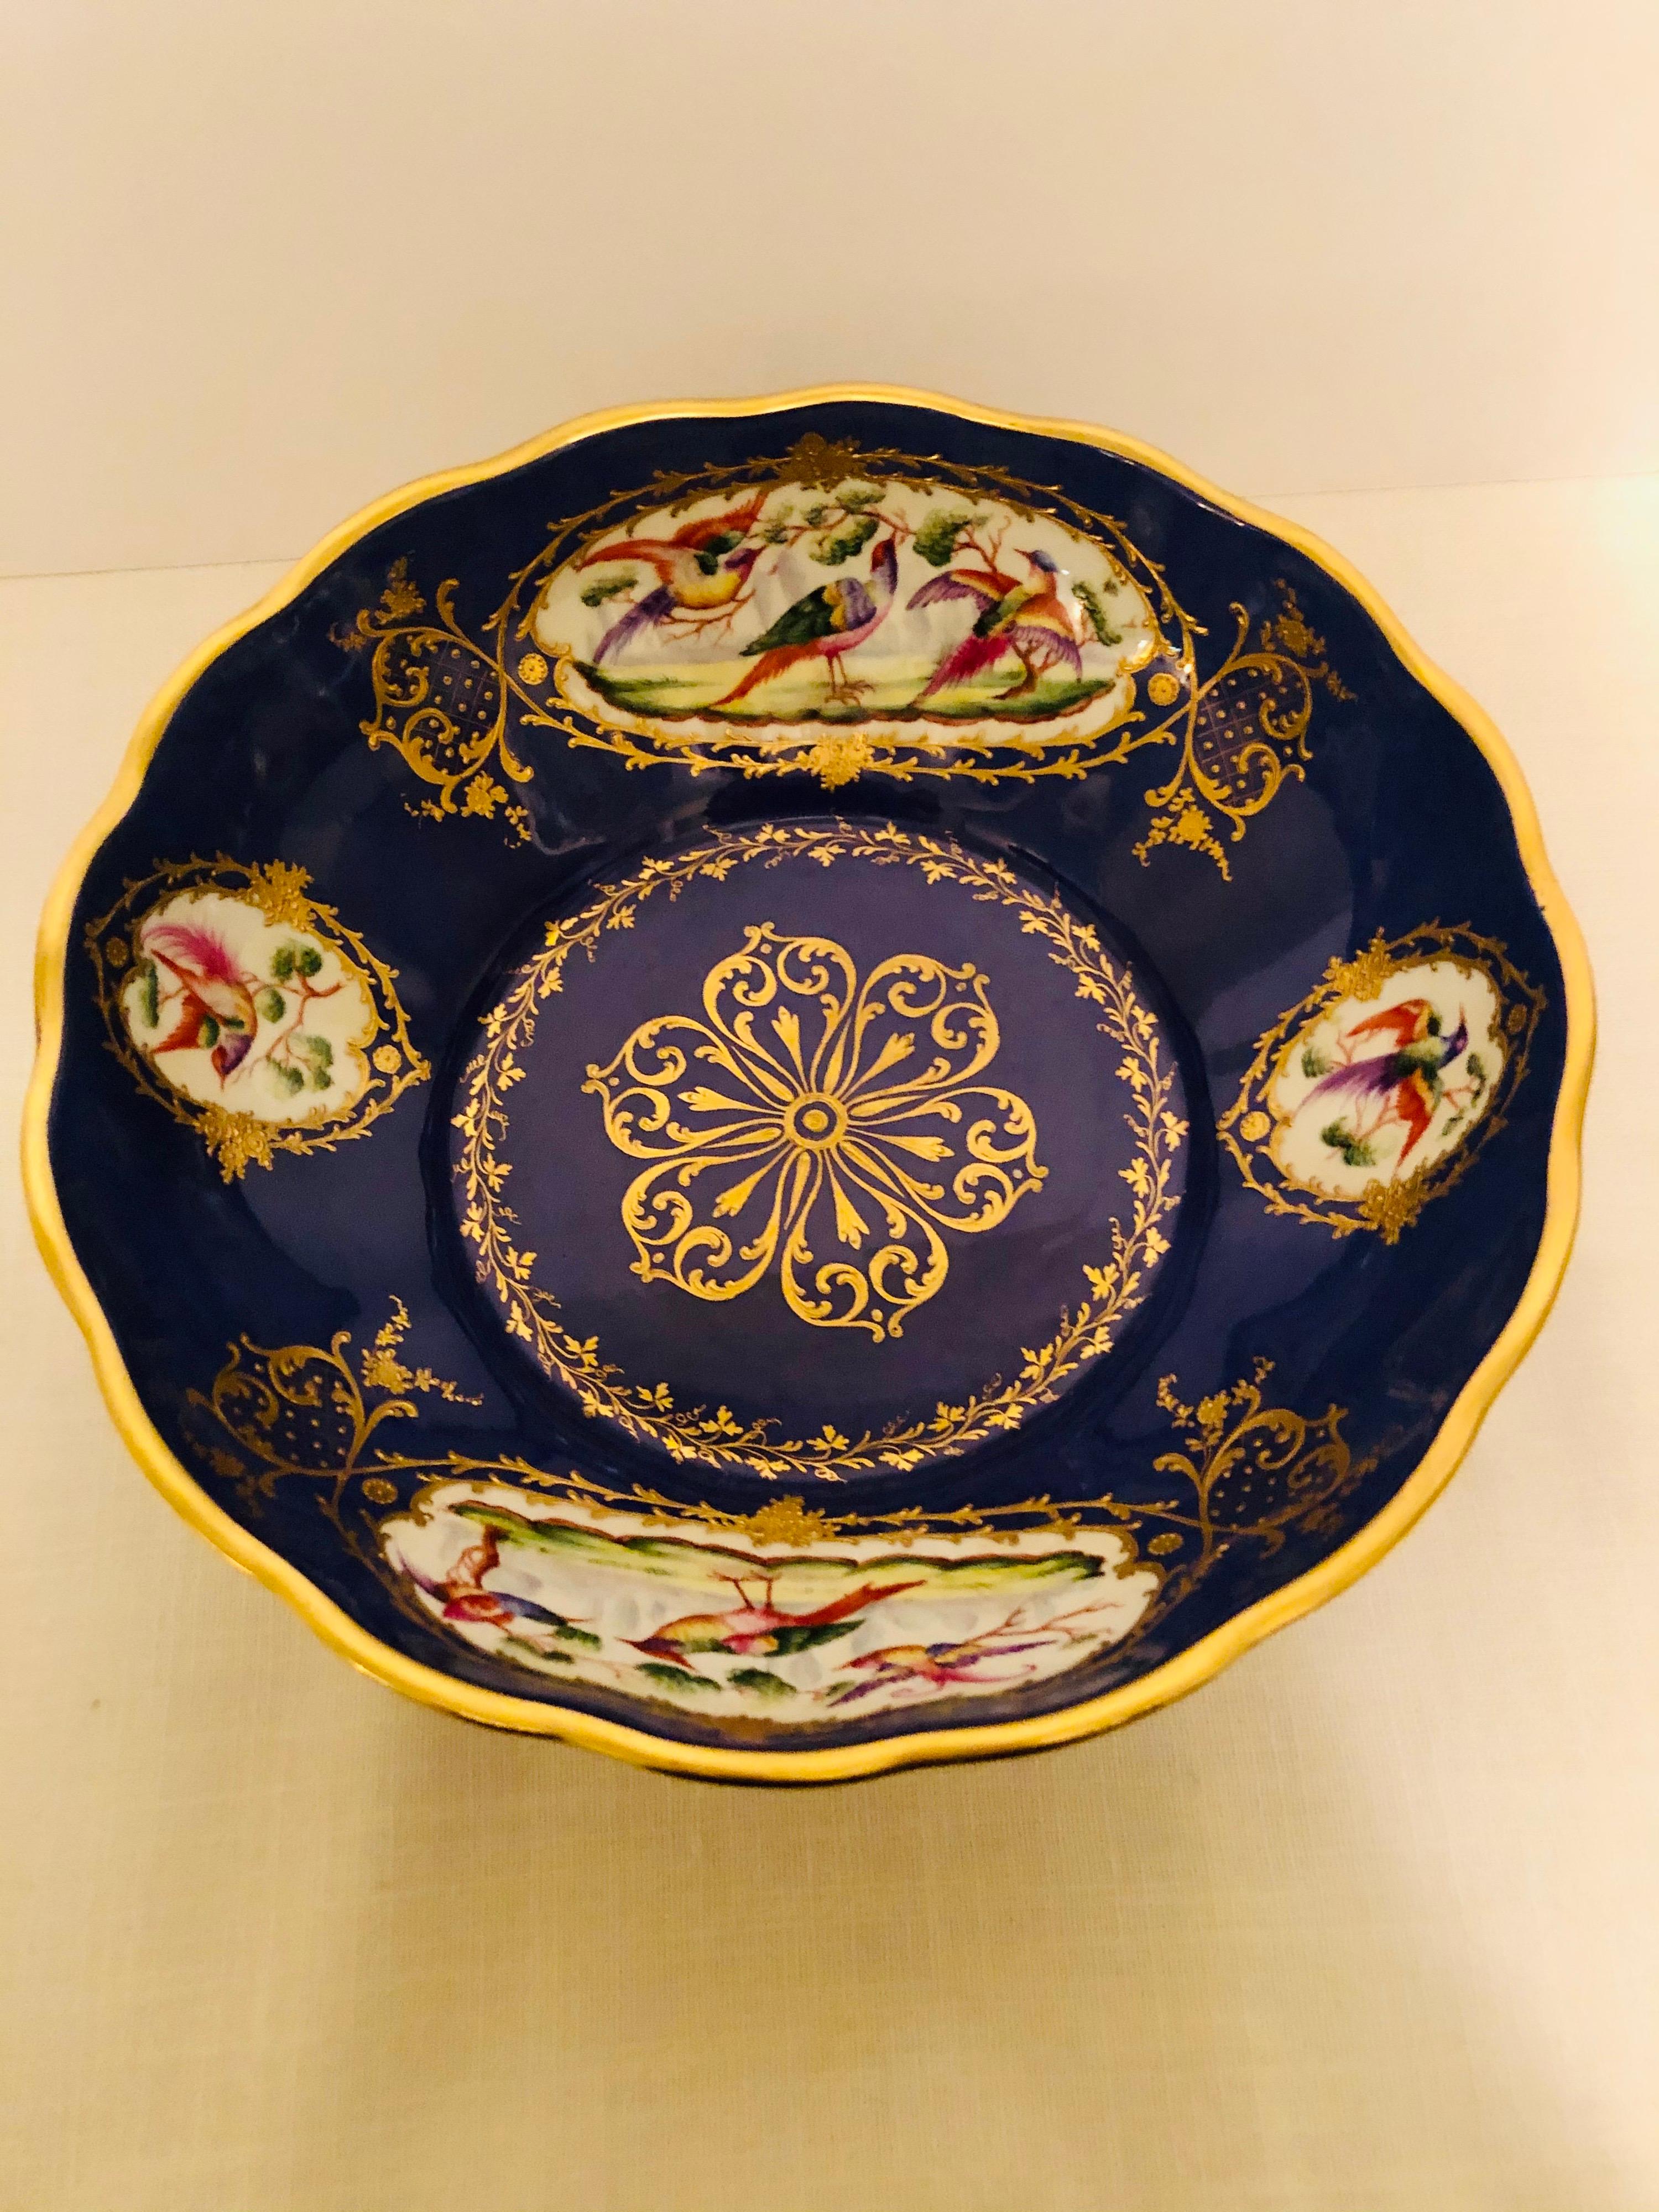 This is a gorgeous Le Tallec royal blue bowl with four cartouches of colorful exotic birds accented with raised gilding embellishments and raised gold jewel accents. This bowl has a gold center medallion, which has gold jewel accents. There are also